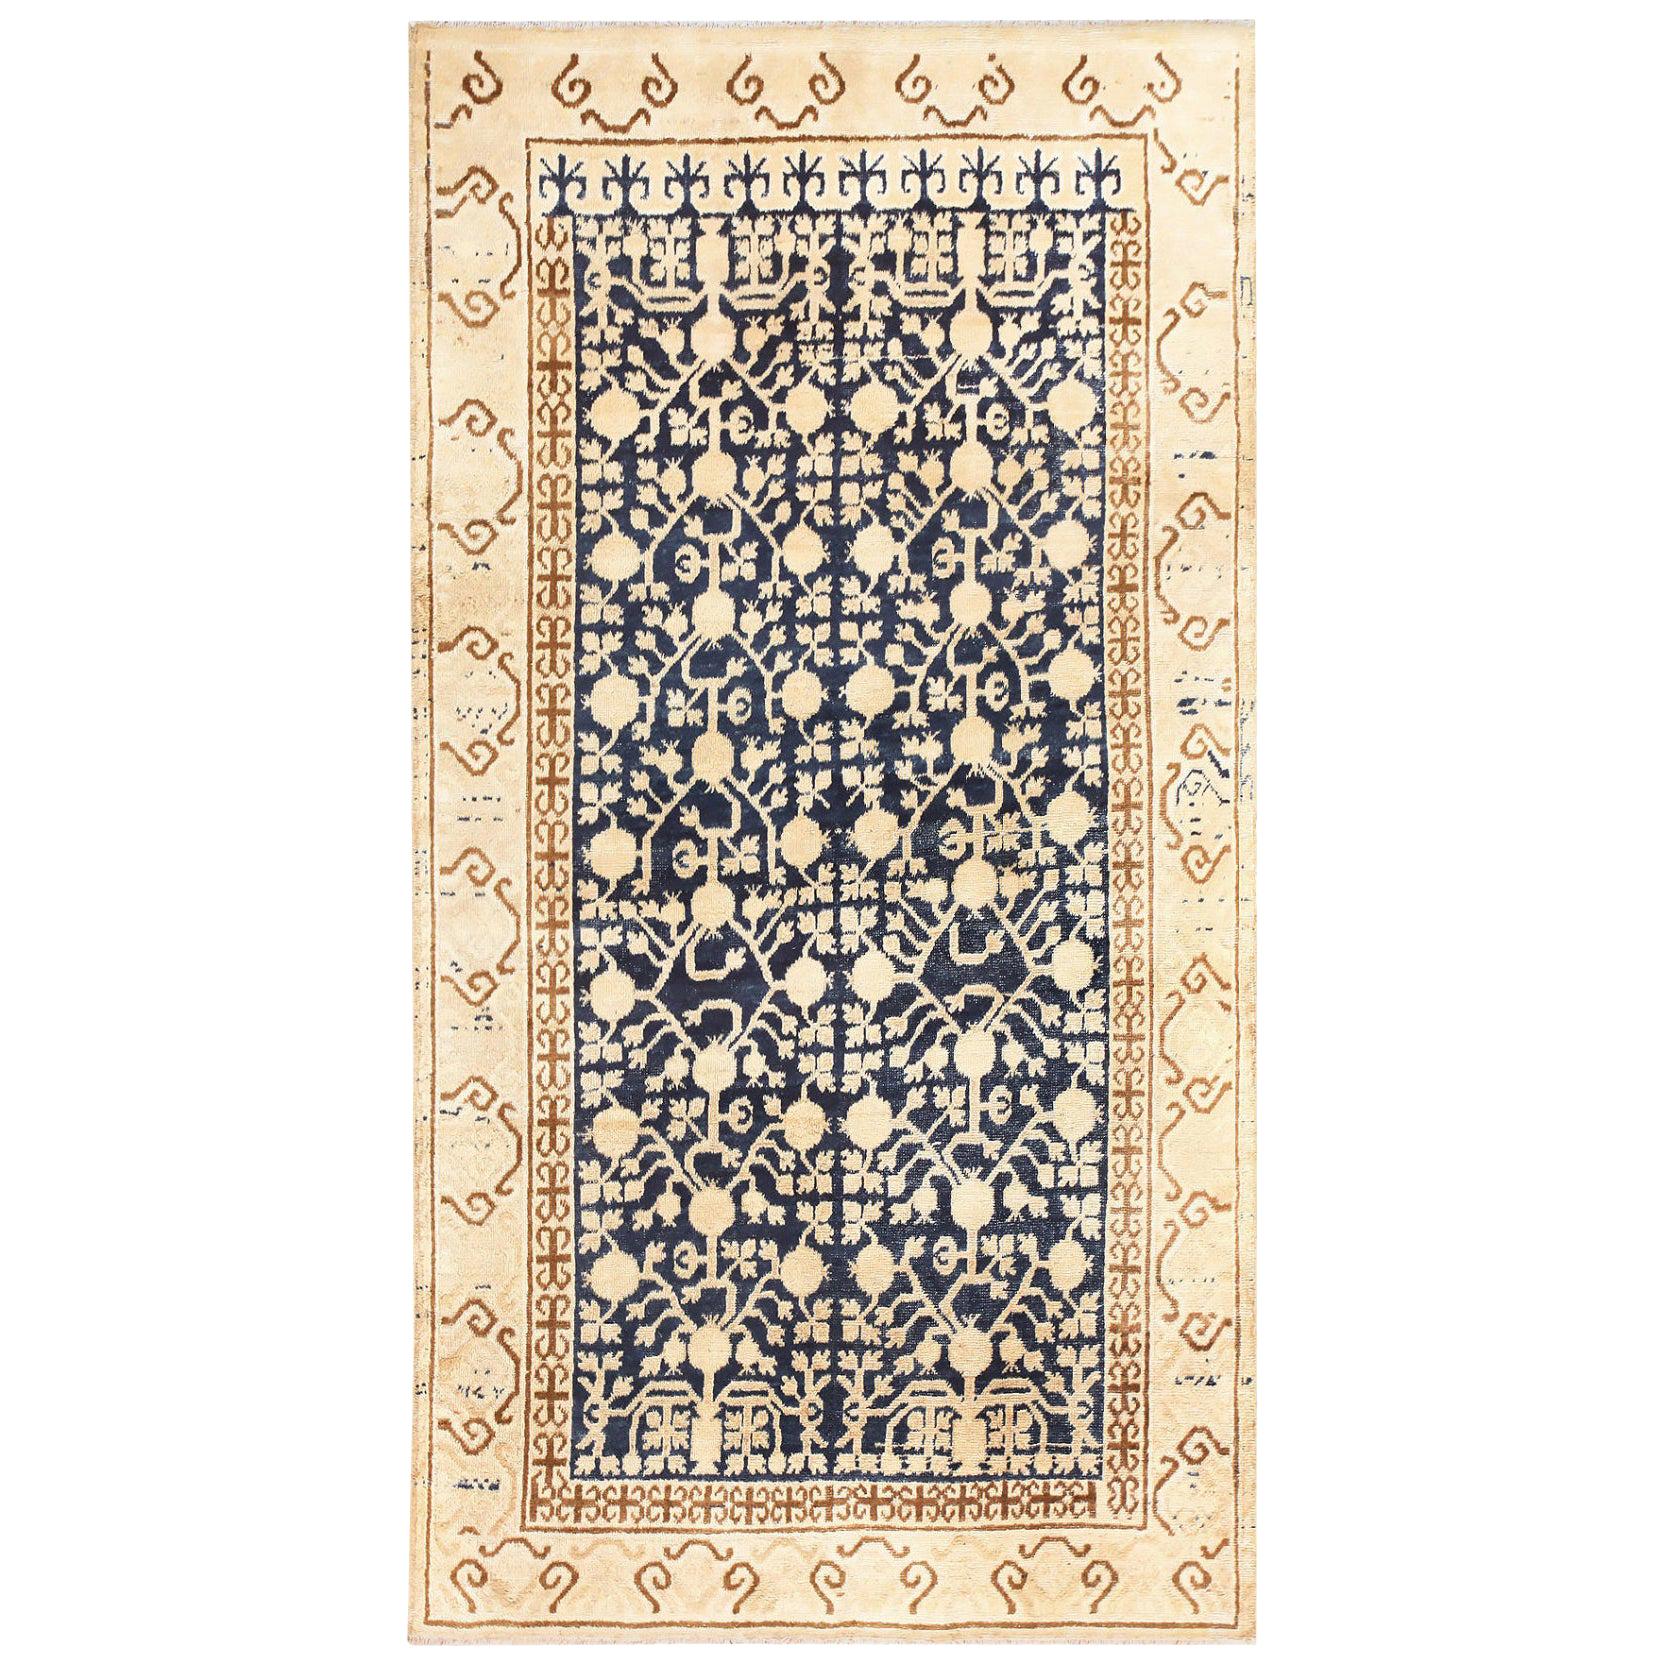 Small Pomegranate Design Antique Khotan Rug. Size: 4 ft 6 in x 8 ft 3 in For Sale